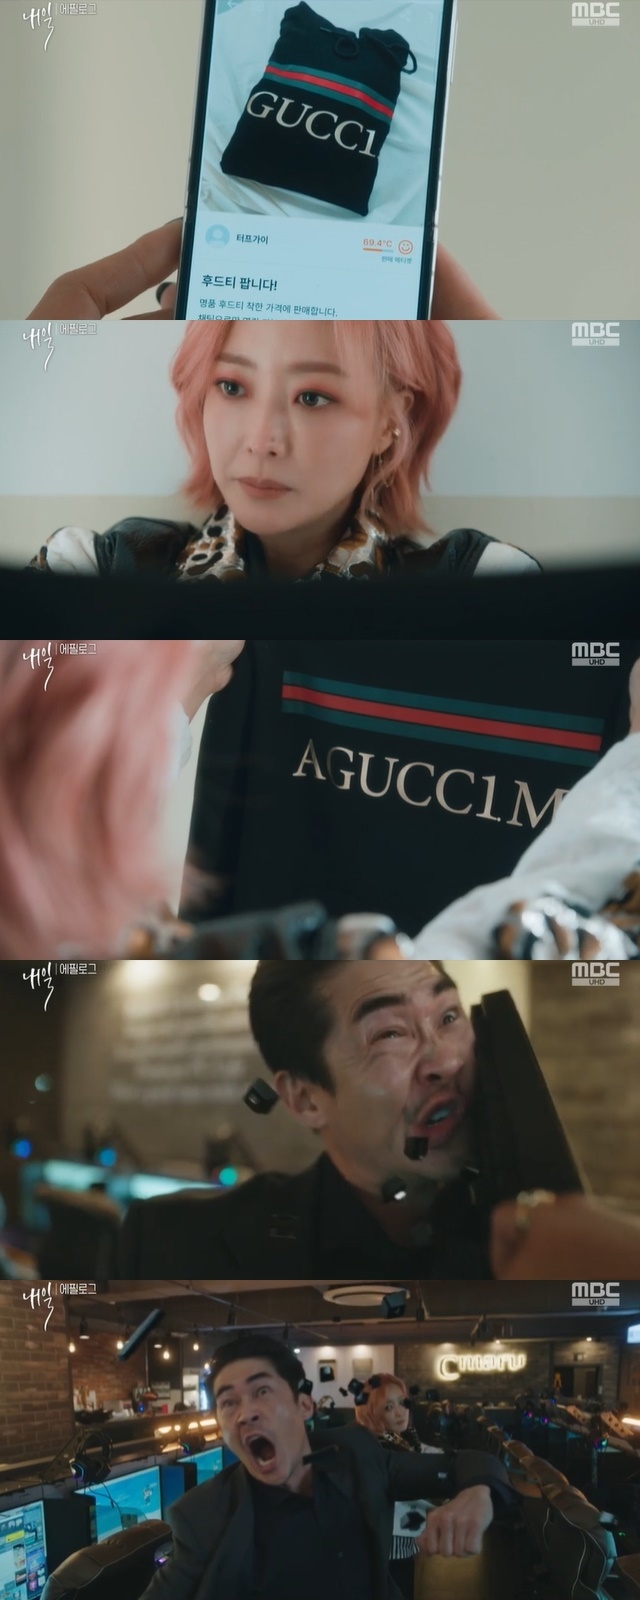 Kim Hee-sun, who was scammed by a luxury clothes used transaction, caught a fraudster, Bae Jeong-nam, and gave a cheerful Revanche.In the MBC new gilt drama tomorrow (playplayplay by Park Ran, Park Ja Kyung, Kim Yoo Jin / Director Kim Tae Yoon, Sung Chi Wook) first broadcast on April 1, the epilogue at the end of the first episode, Kim Hee-sun was written by Robin Hoodty, Agwi-jim (AGUCCIM) The story has been revealed.The training was followed by a secondhand application to buy clothes to Choi Jun-woong, who woke up at the hospital, and then found a luxury Robin Hoodty and bought it immediately.The luxury goods Robin Hoodty received afterwards had a reversal: it was definitely a G-company luxury, but when I unfolded it completely, the spelling on the front was Agwi-jjim (AGUCCIM).